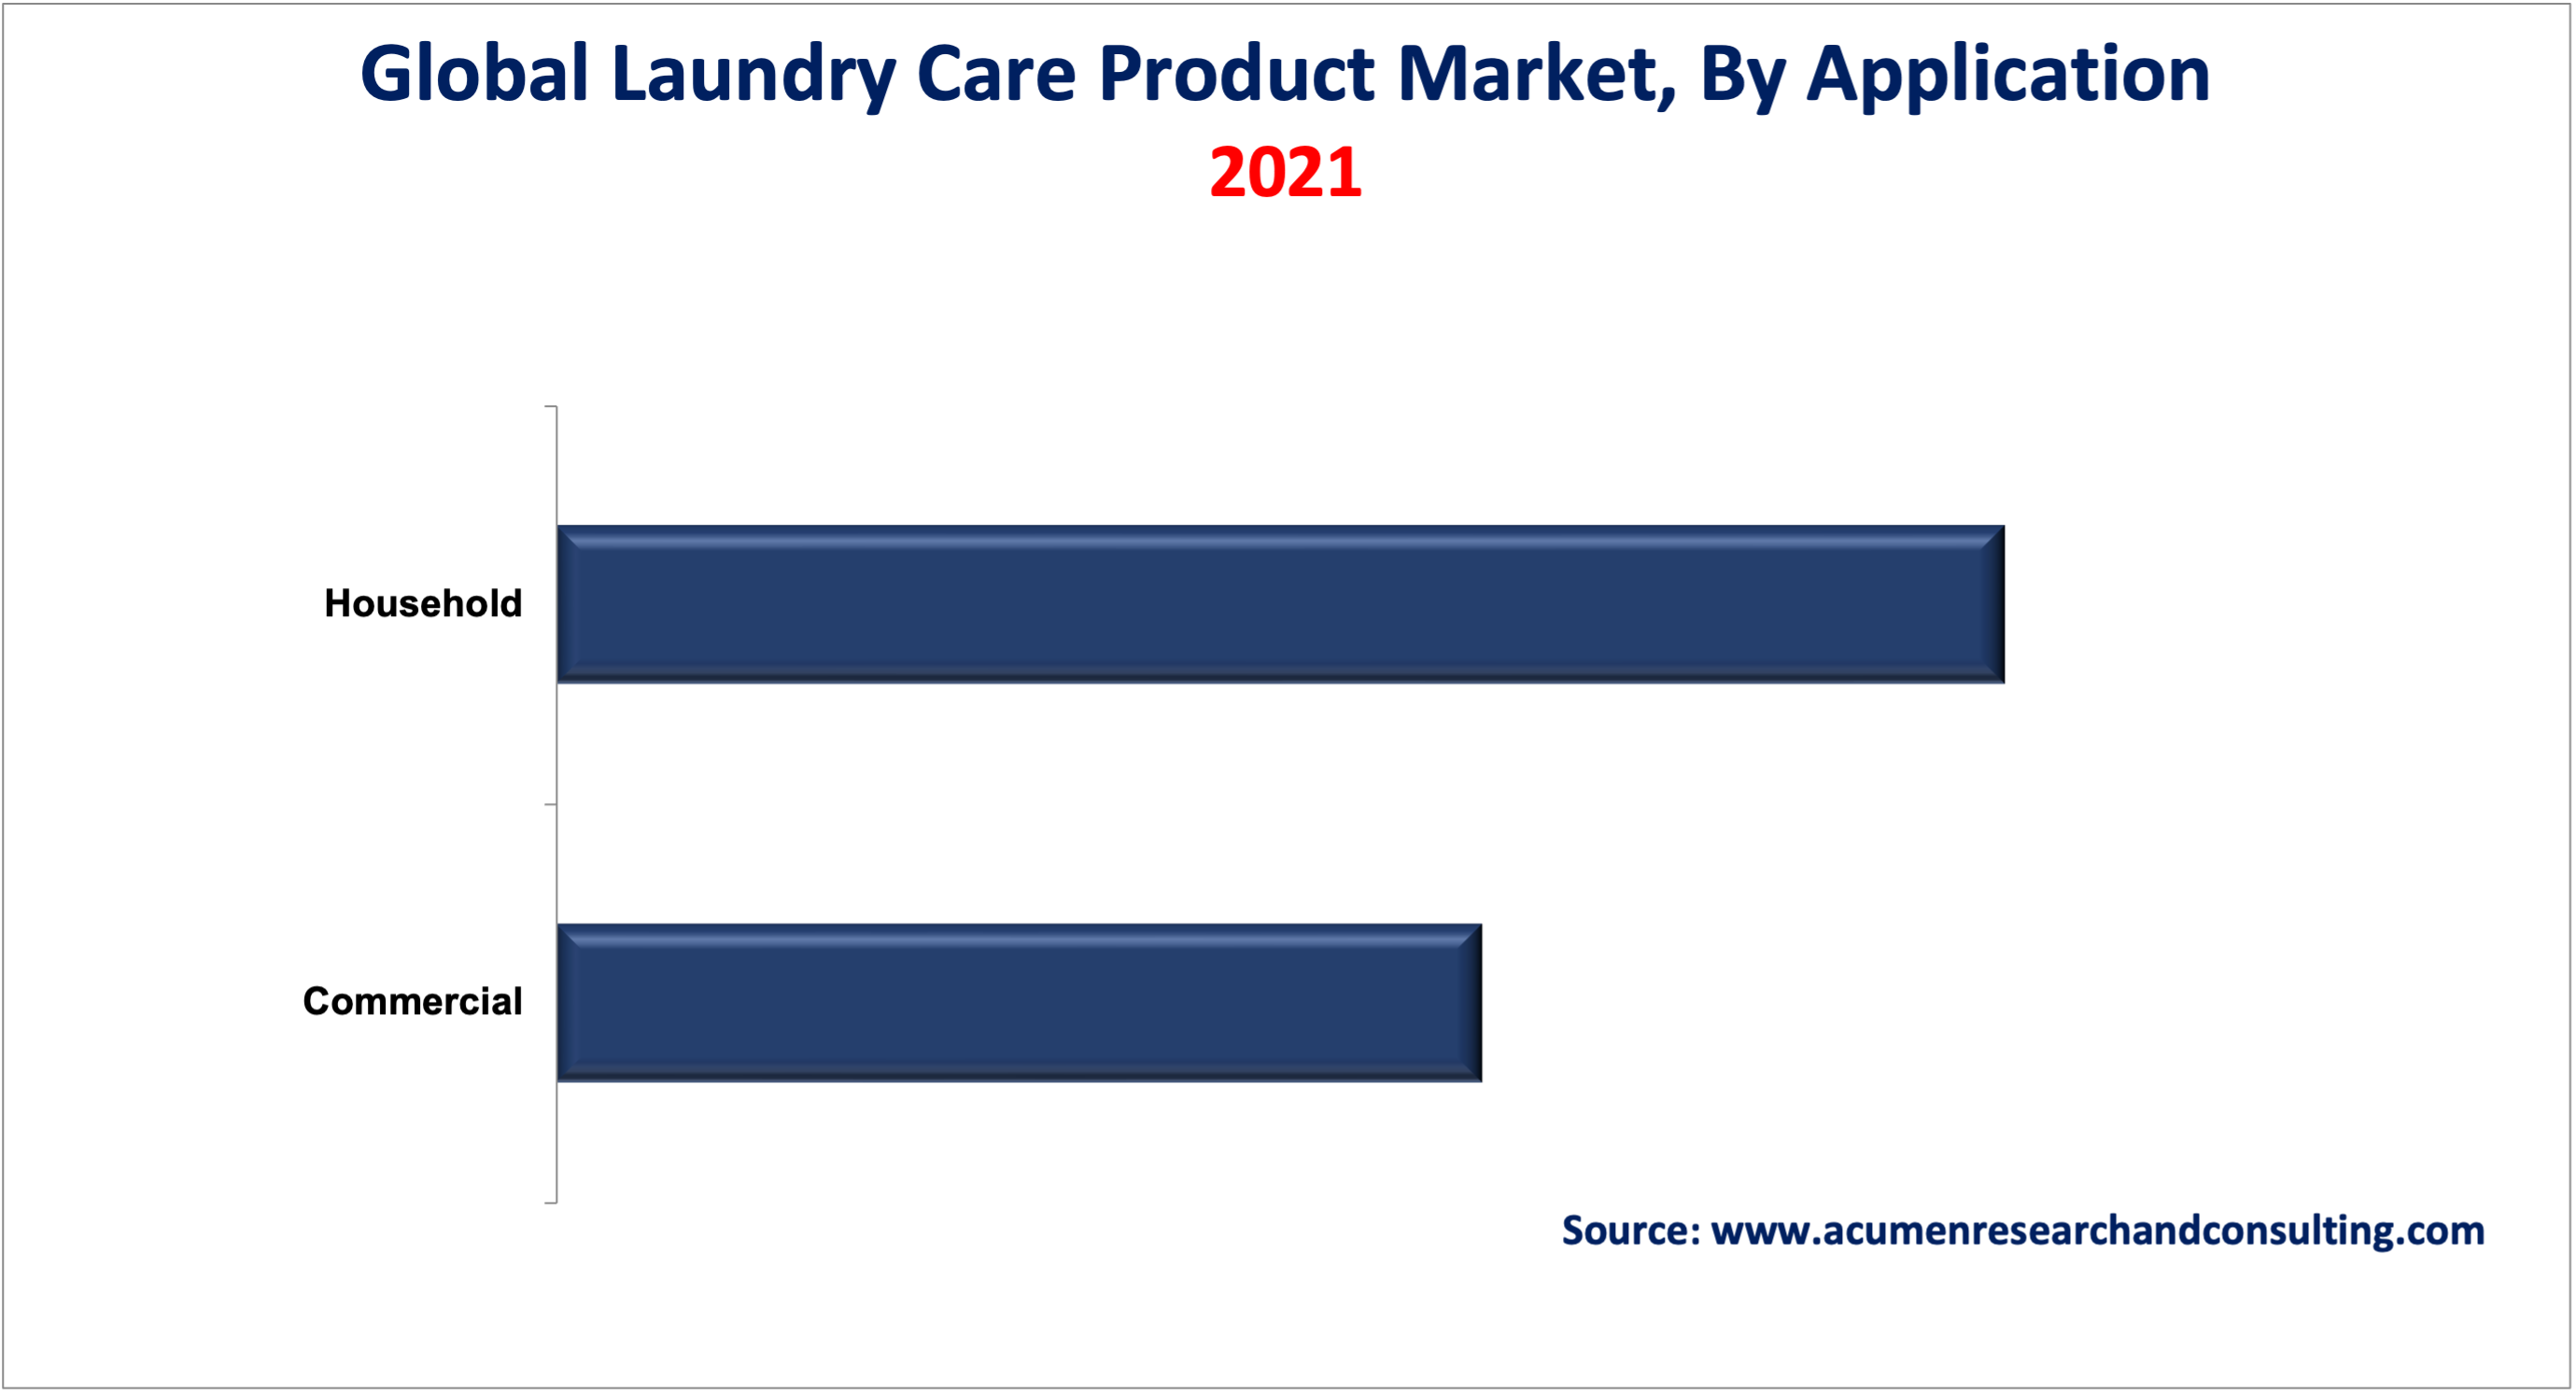 Laundry Care Products Market